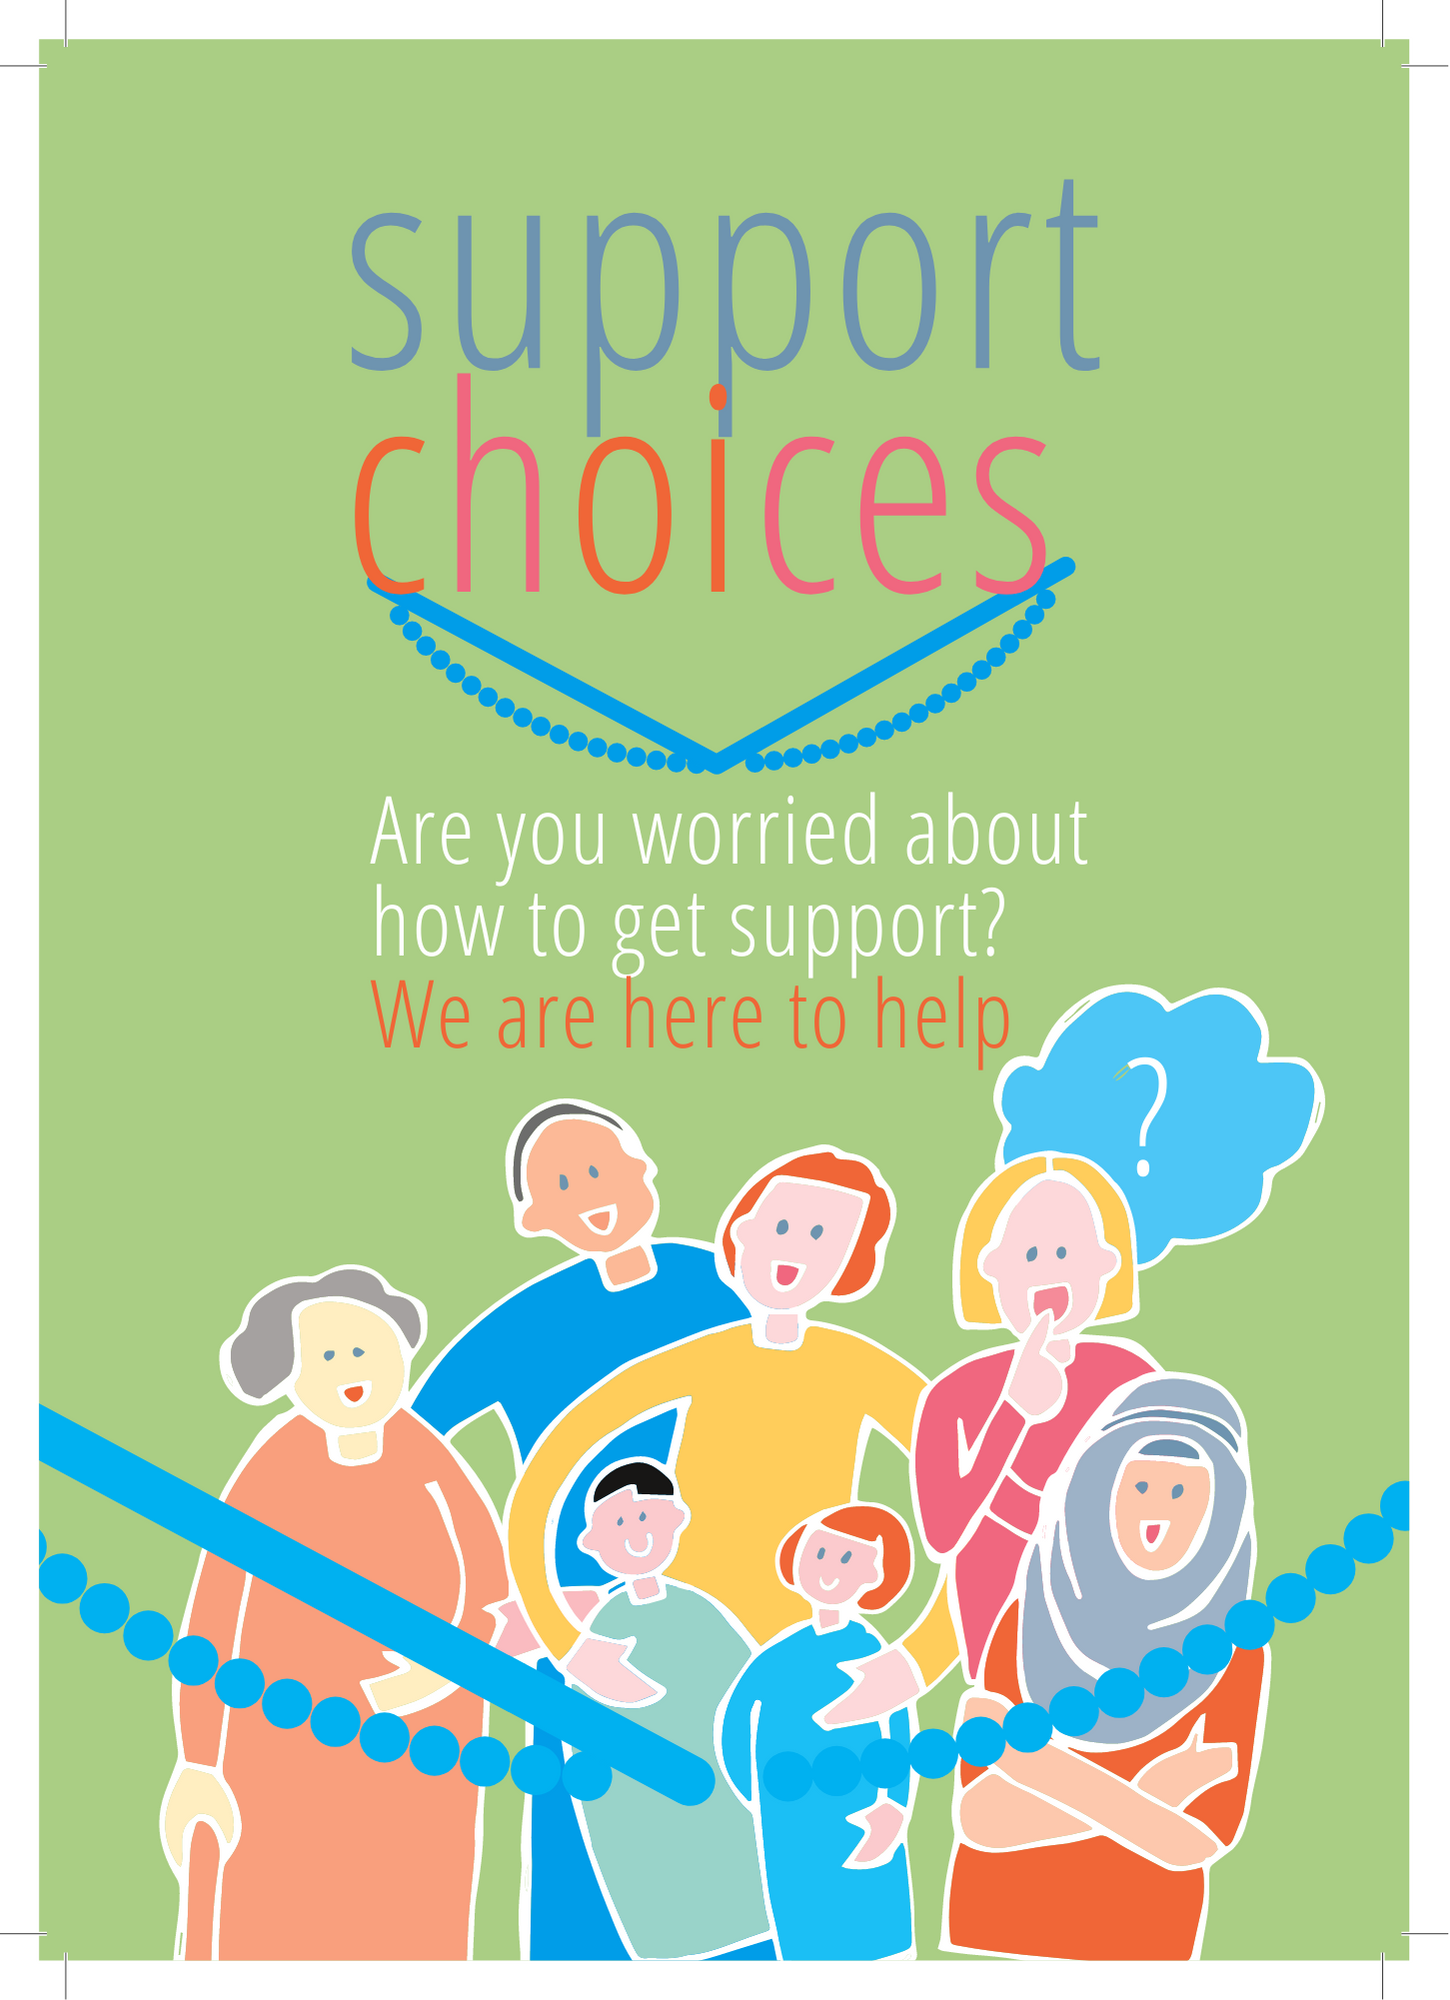 Support Choices. Are you worries about how to get support? We are here to help